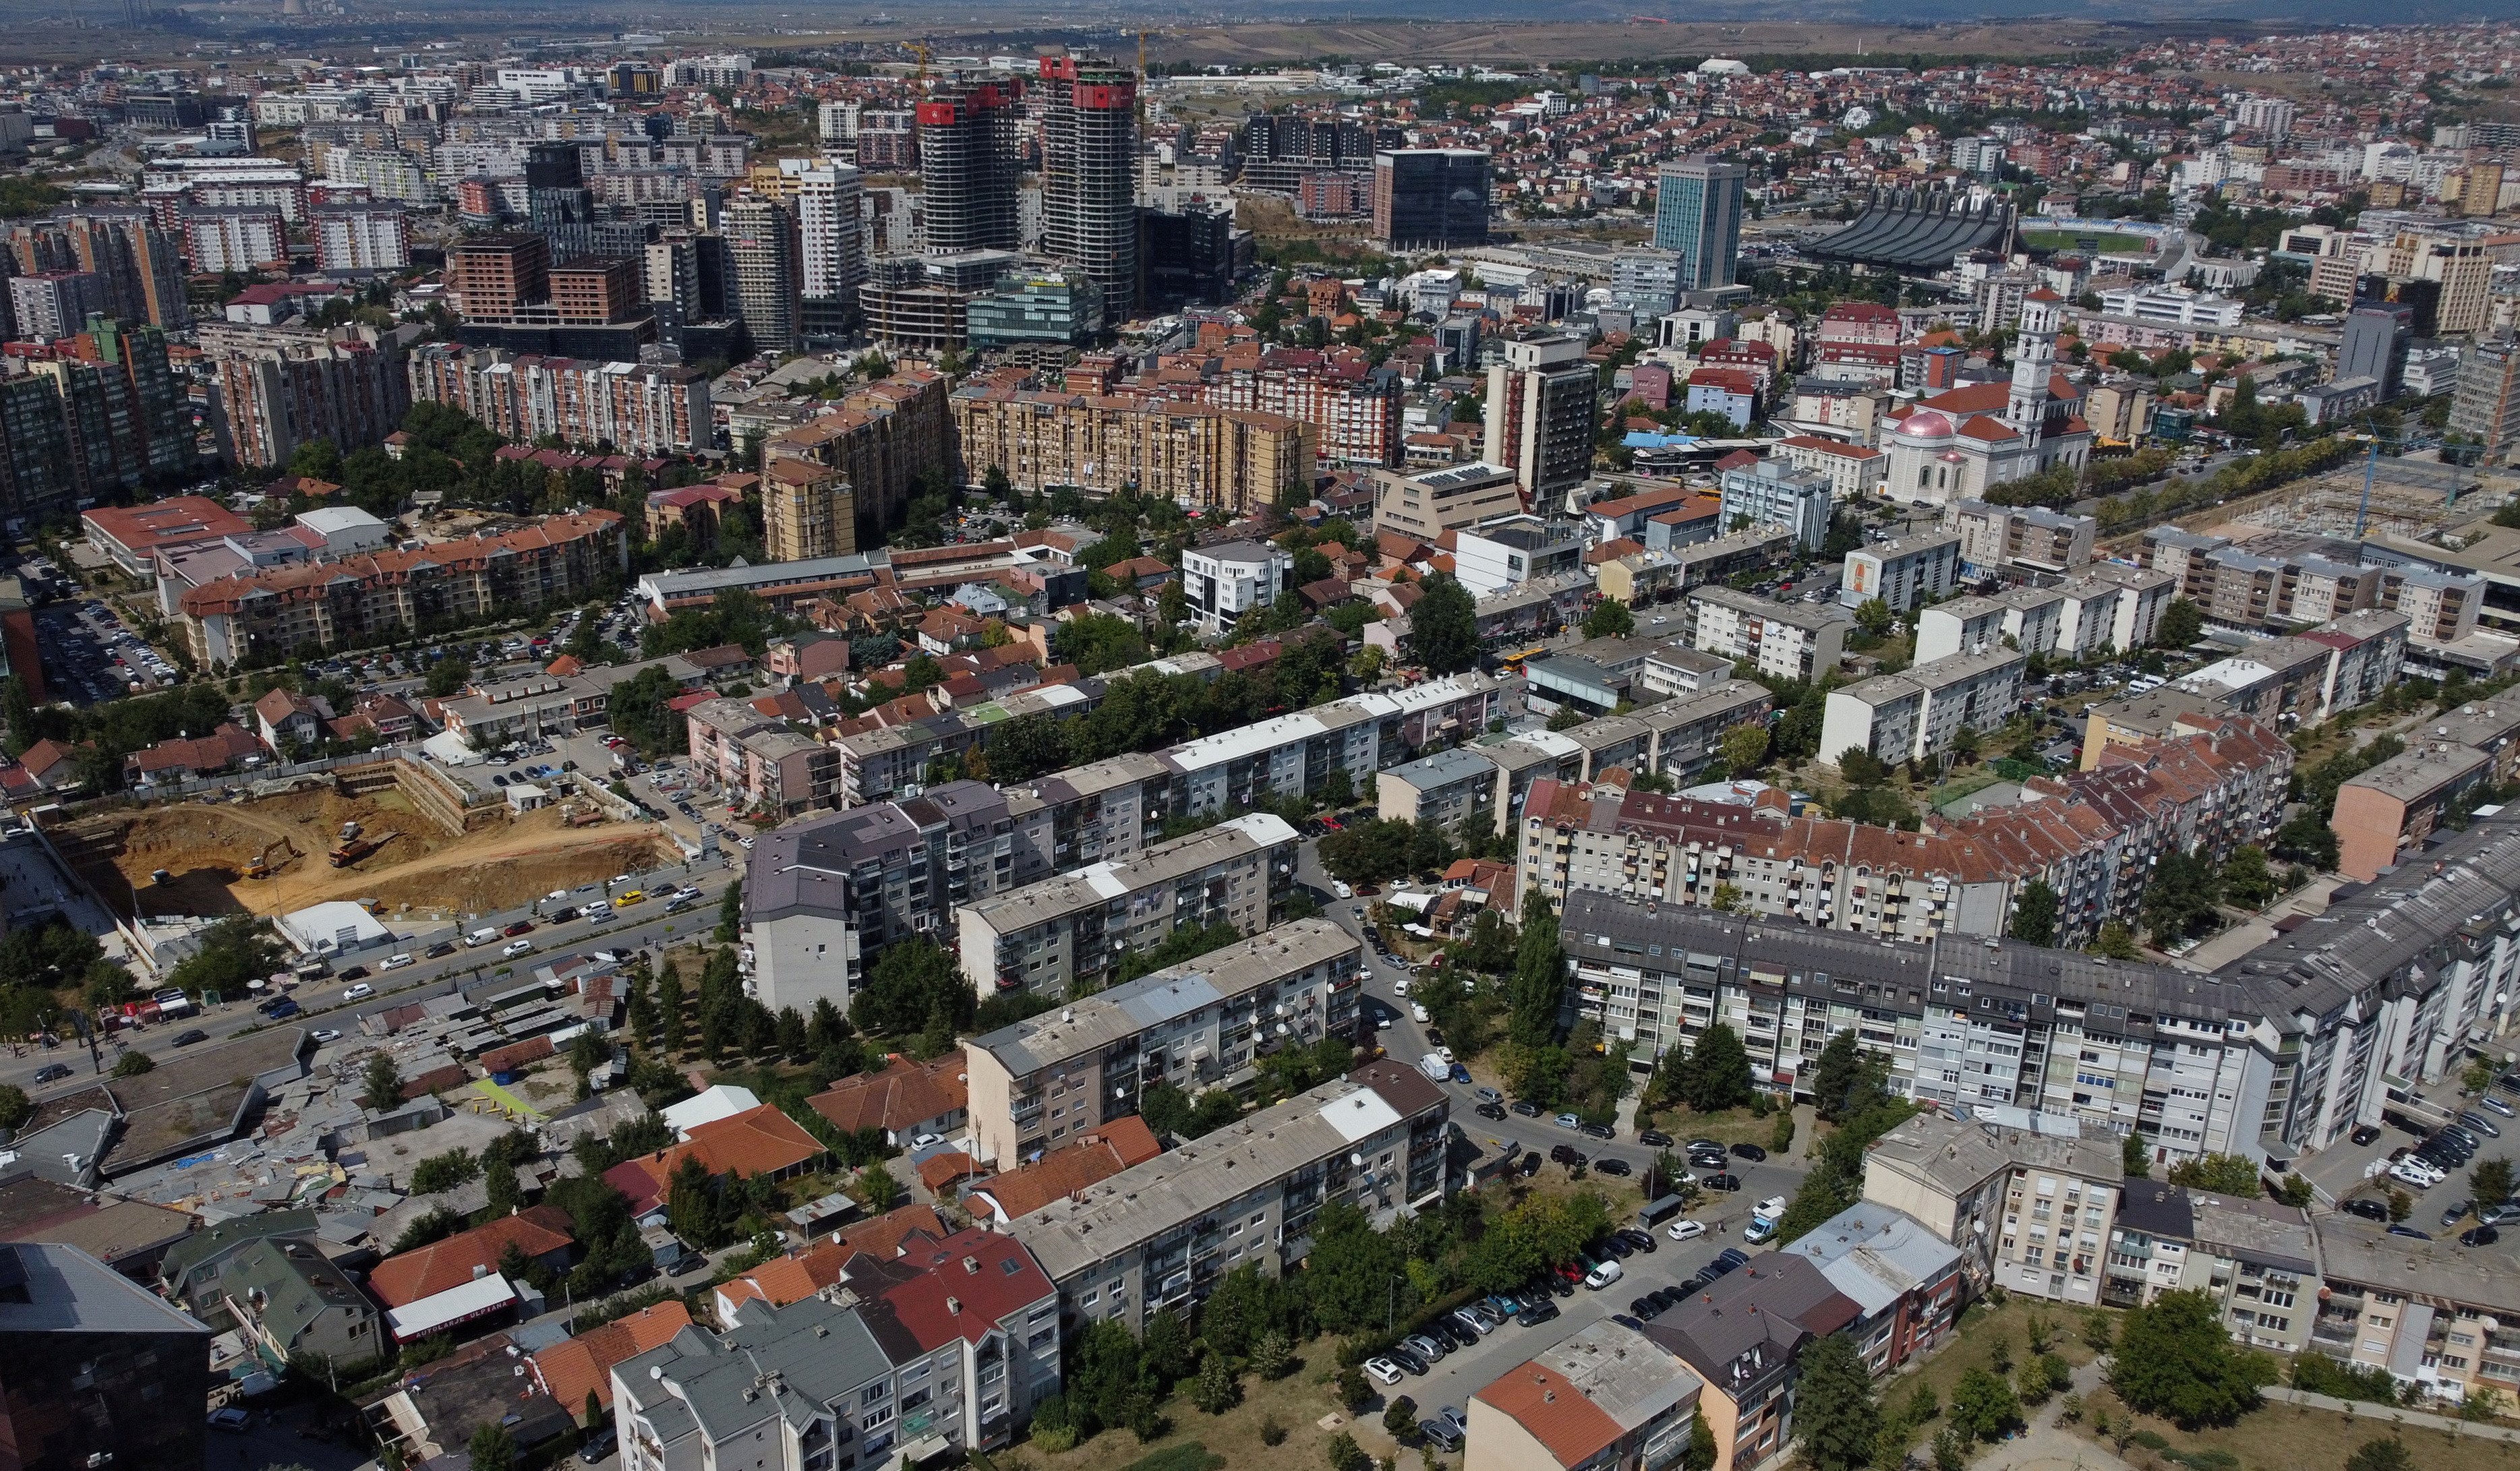 A general view shows the city of Pristina